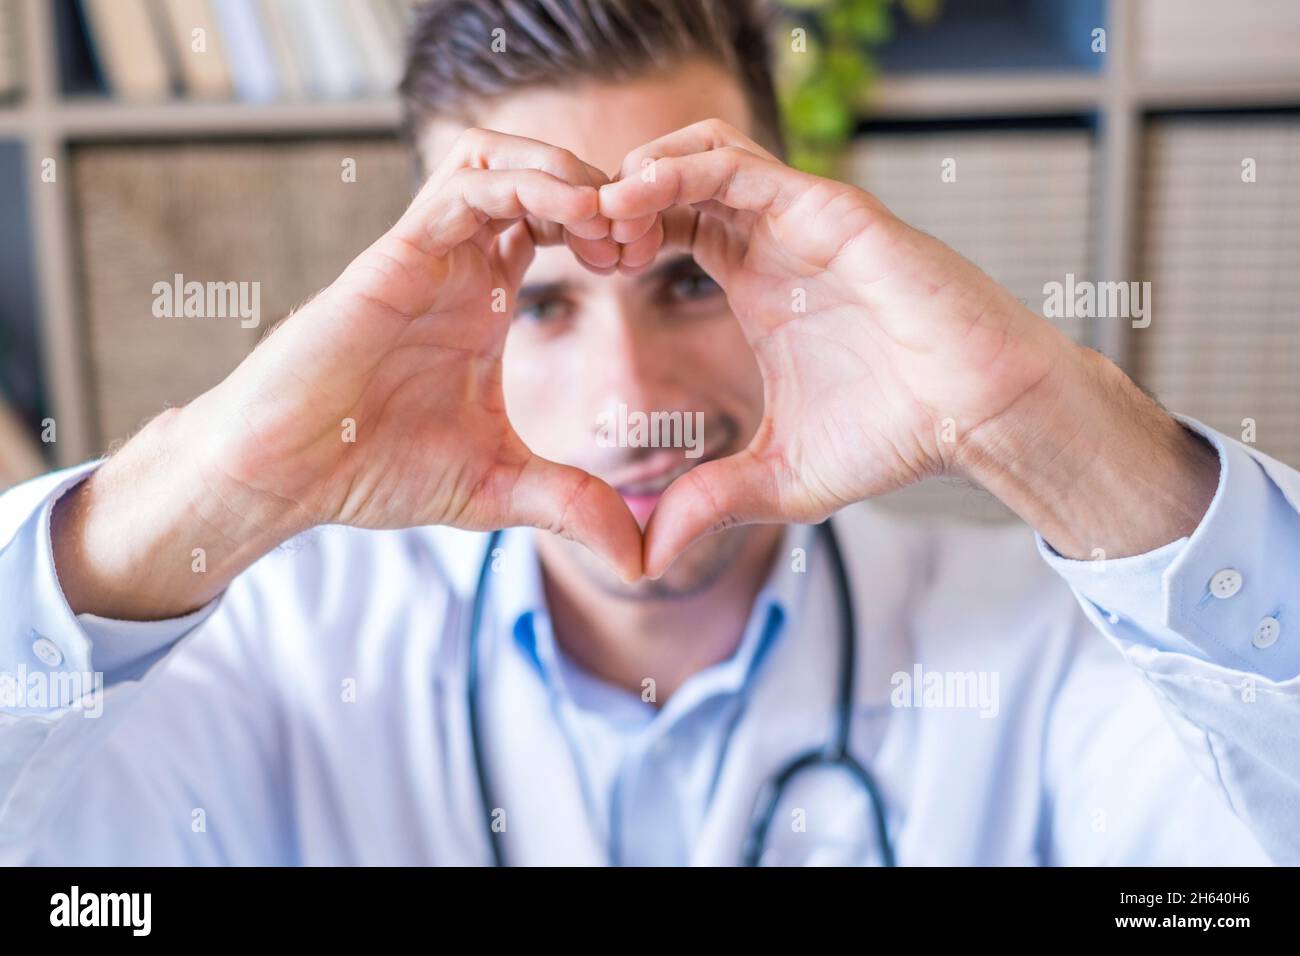 close up portrait of smiling young caucasian male nurse or gp in white medical uniform show heart love hand gesture. happy young man doctor show support and care to patients or client in hospital. Stock Photo